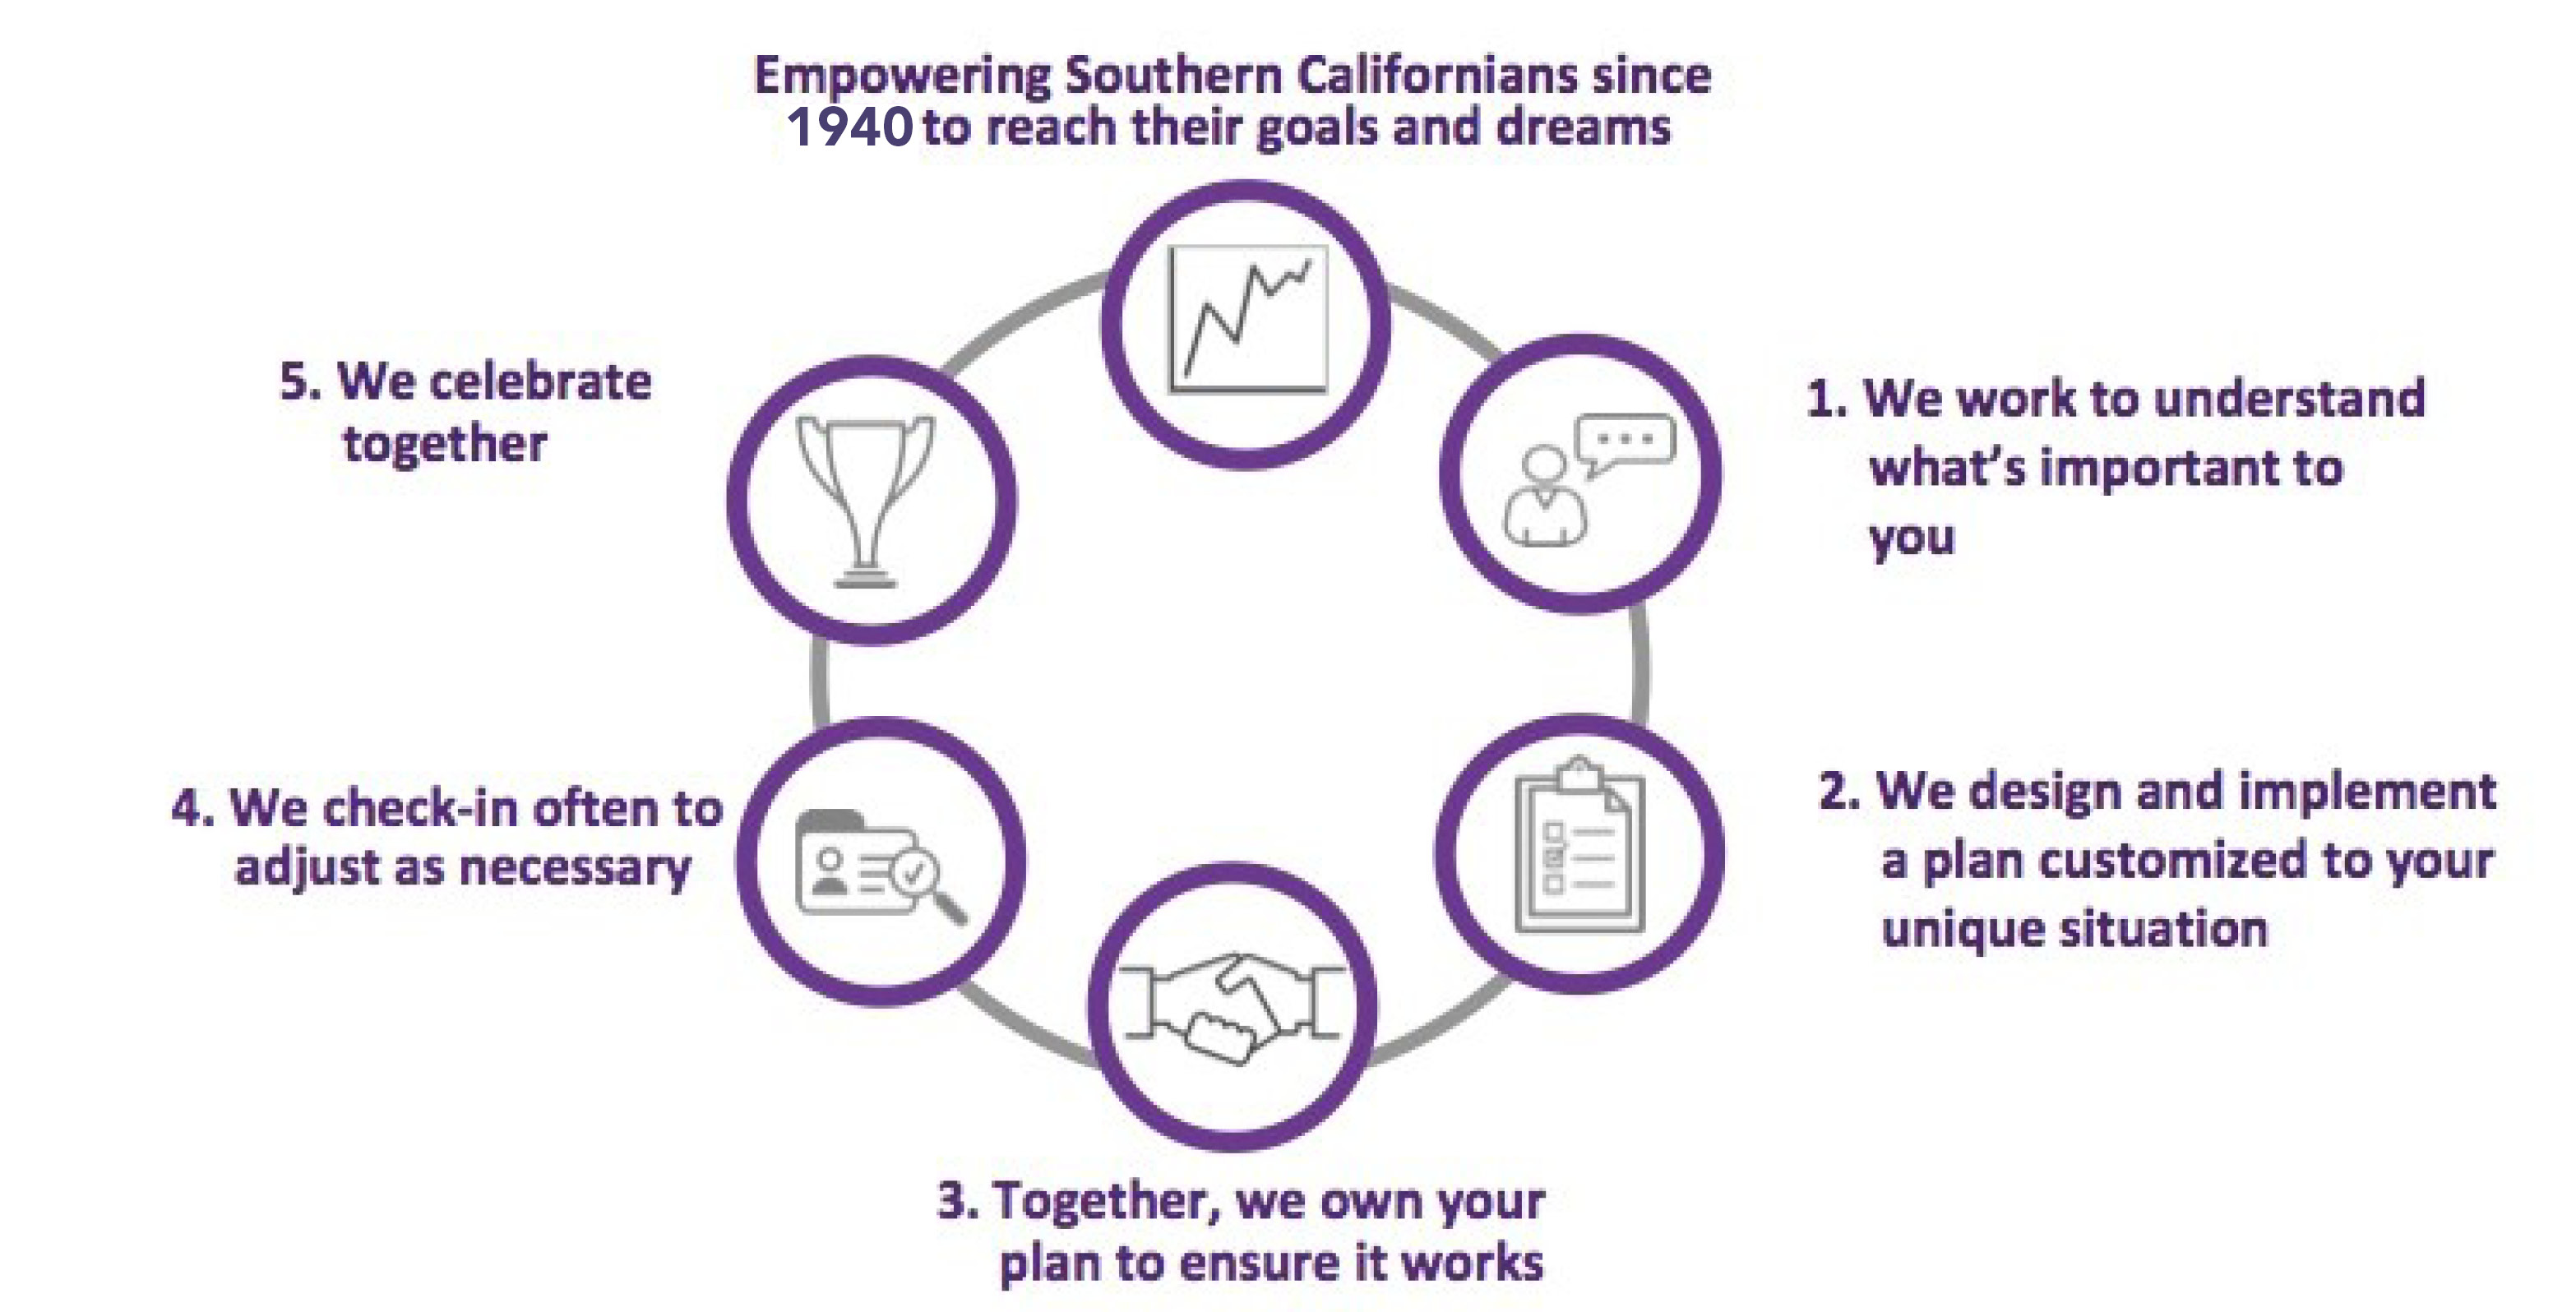 Infographic: "Empowering Southern Californians since 1940 to reach their goals and dreams: 1 we work to undestand what's important to you, 2 We design and implement a plan customized to your unique situation, 3 Together we own your plan to ensure it works, 4 We check in often to adjust as necessasry, 5 We celebrate together."